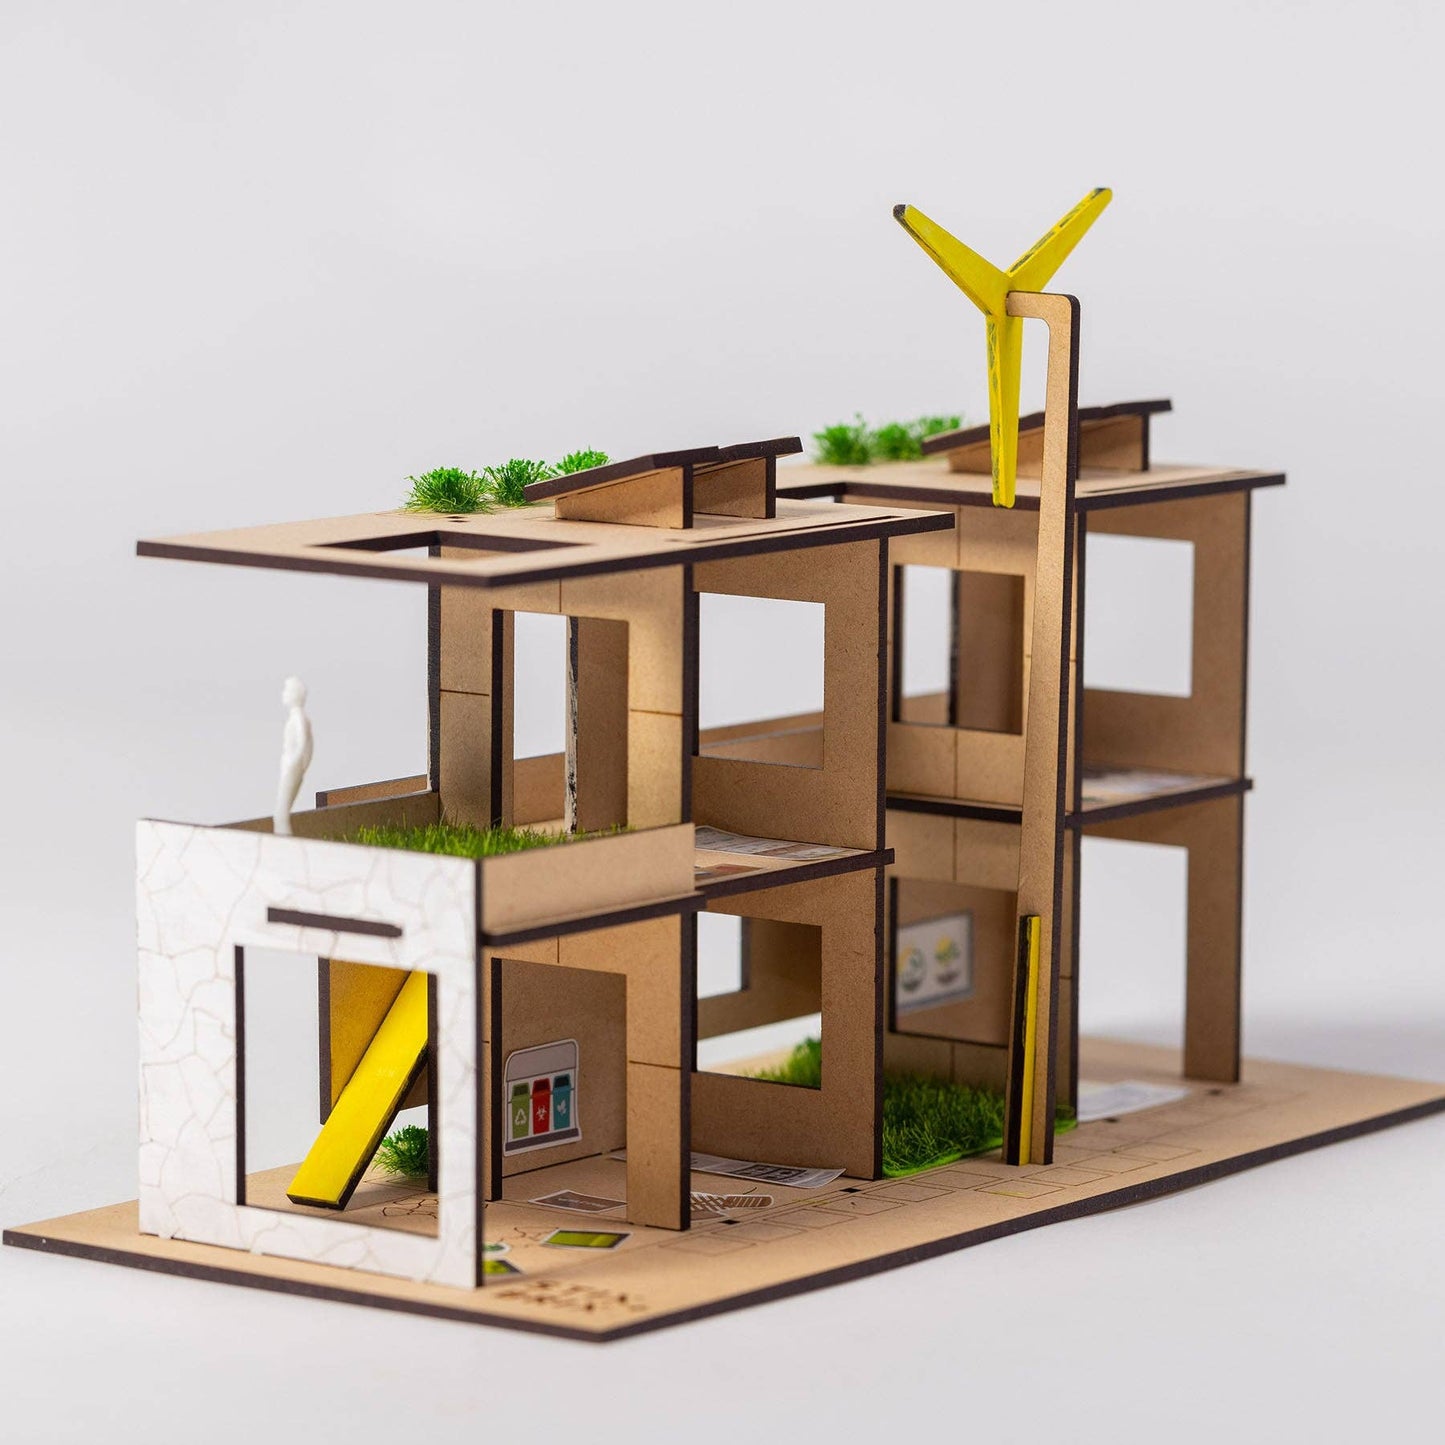 Eco-House Architectural Model Making Kit